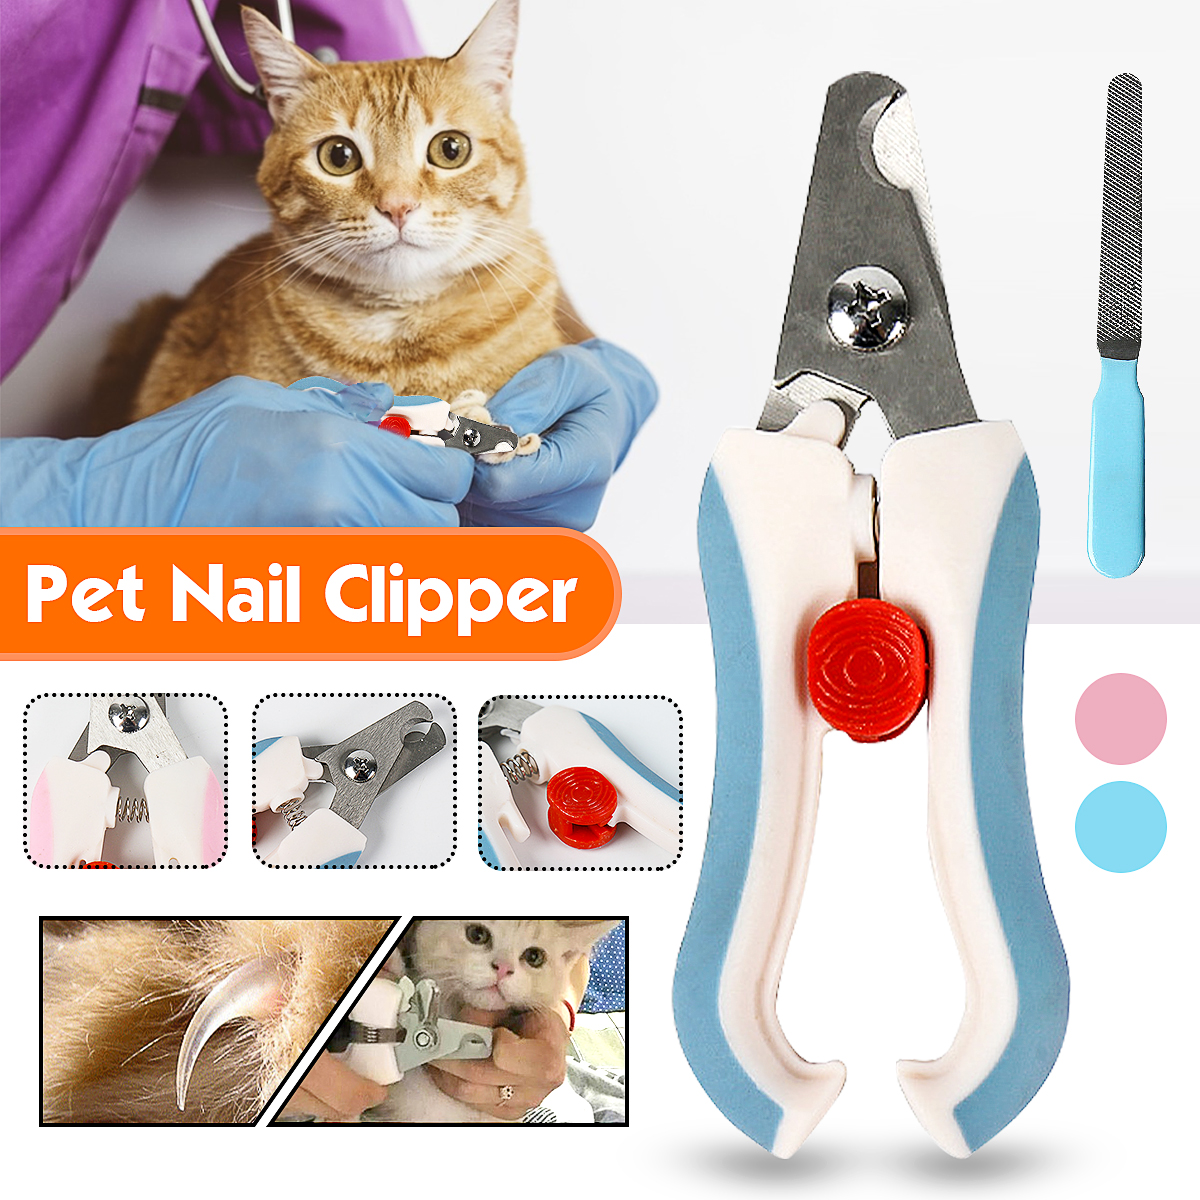 Pet-Dog-Cat-Claw-Nail-File-Scissors-Toe-Clipper-Cutter-Trimmer-Stainless-Steel-Cutter-Tool-1705426-1